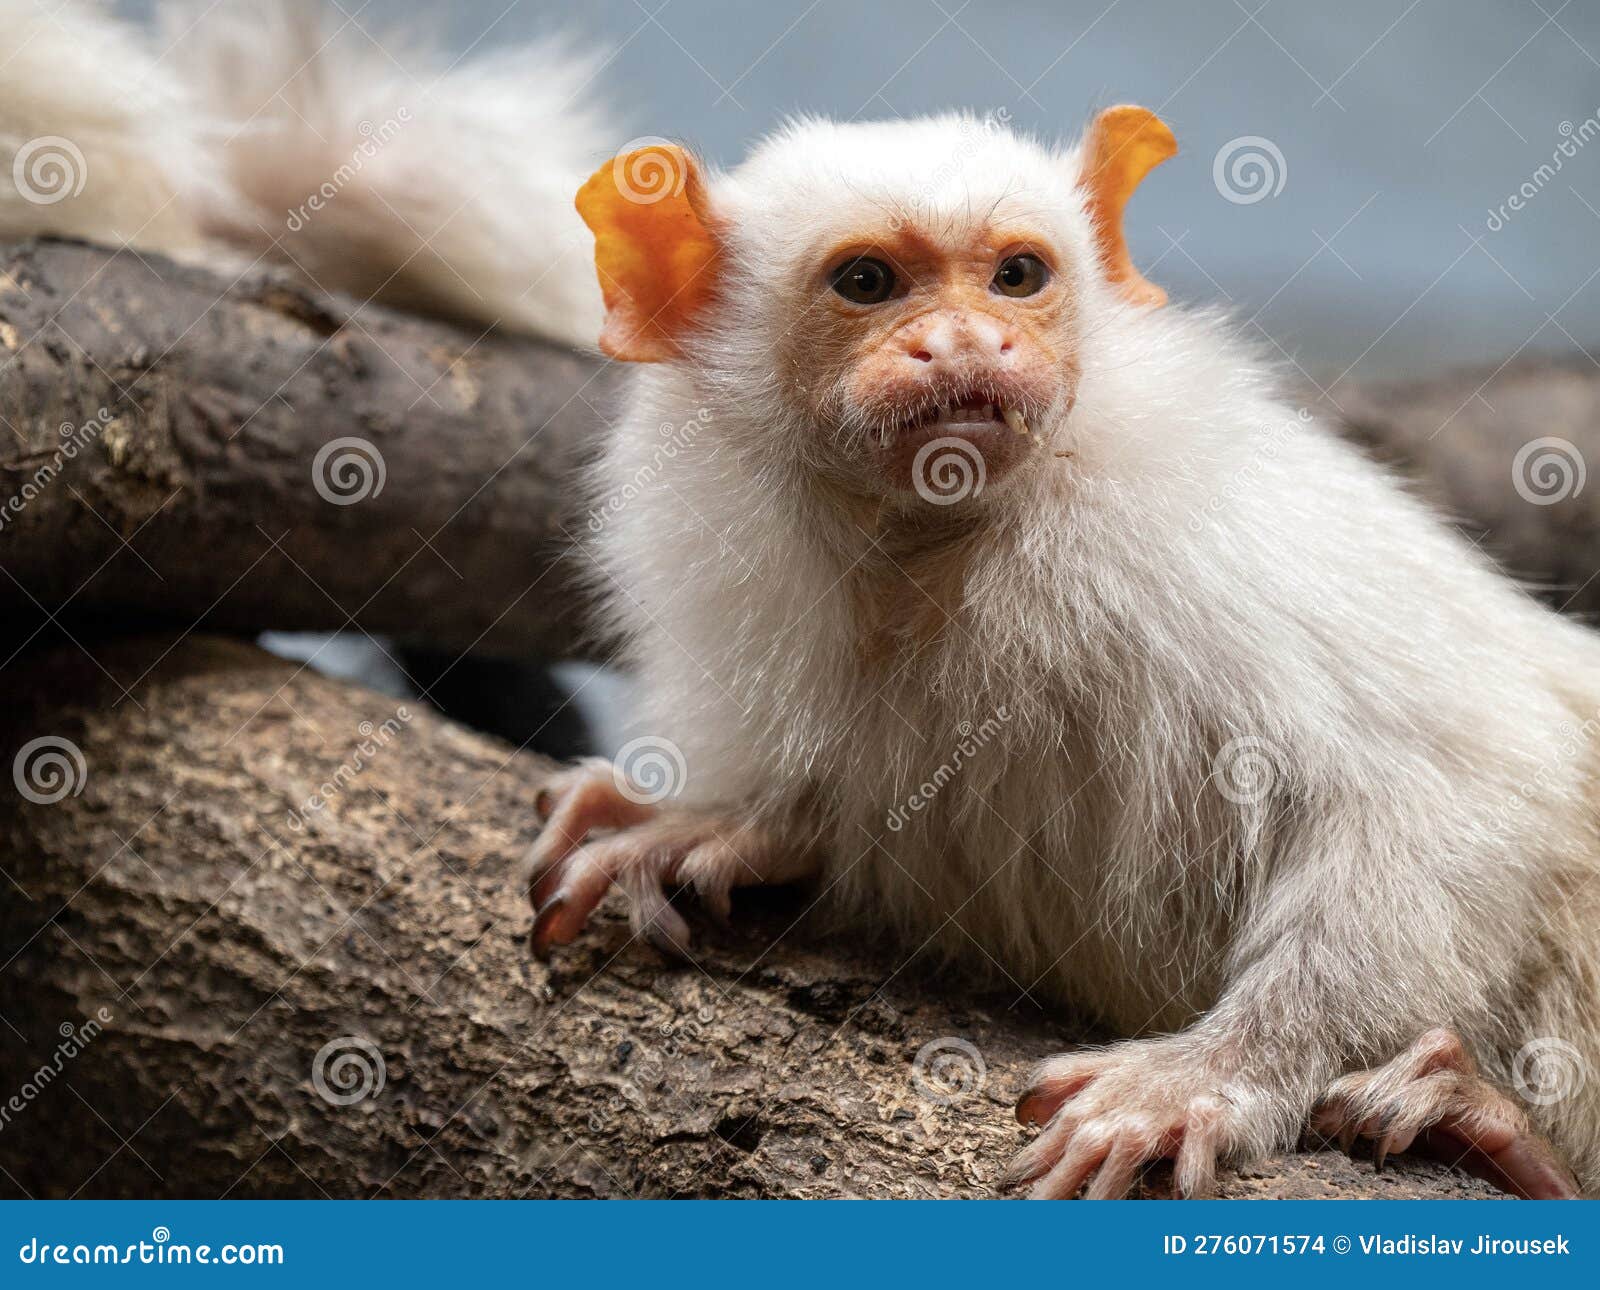 the silvery marmoset, mico argentatus, sits on a branch and observes the surroundings